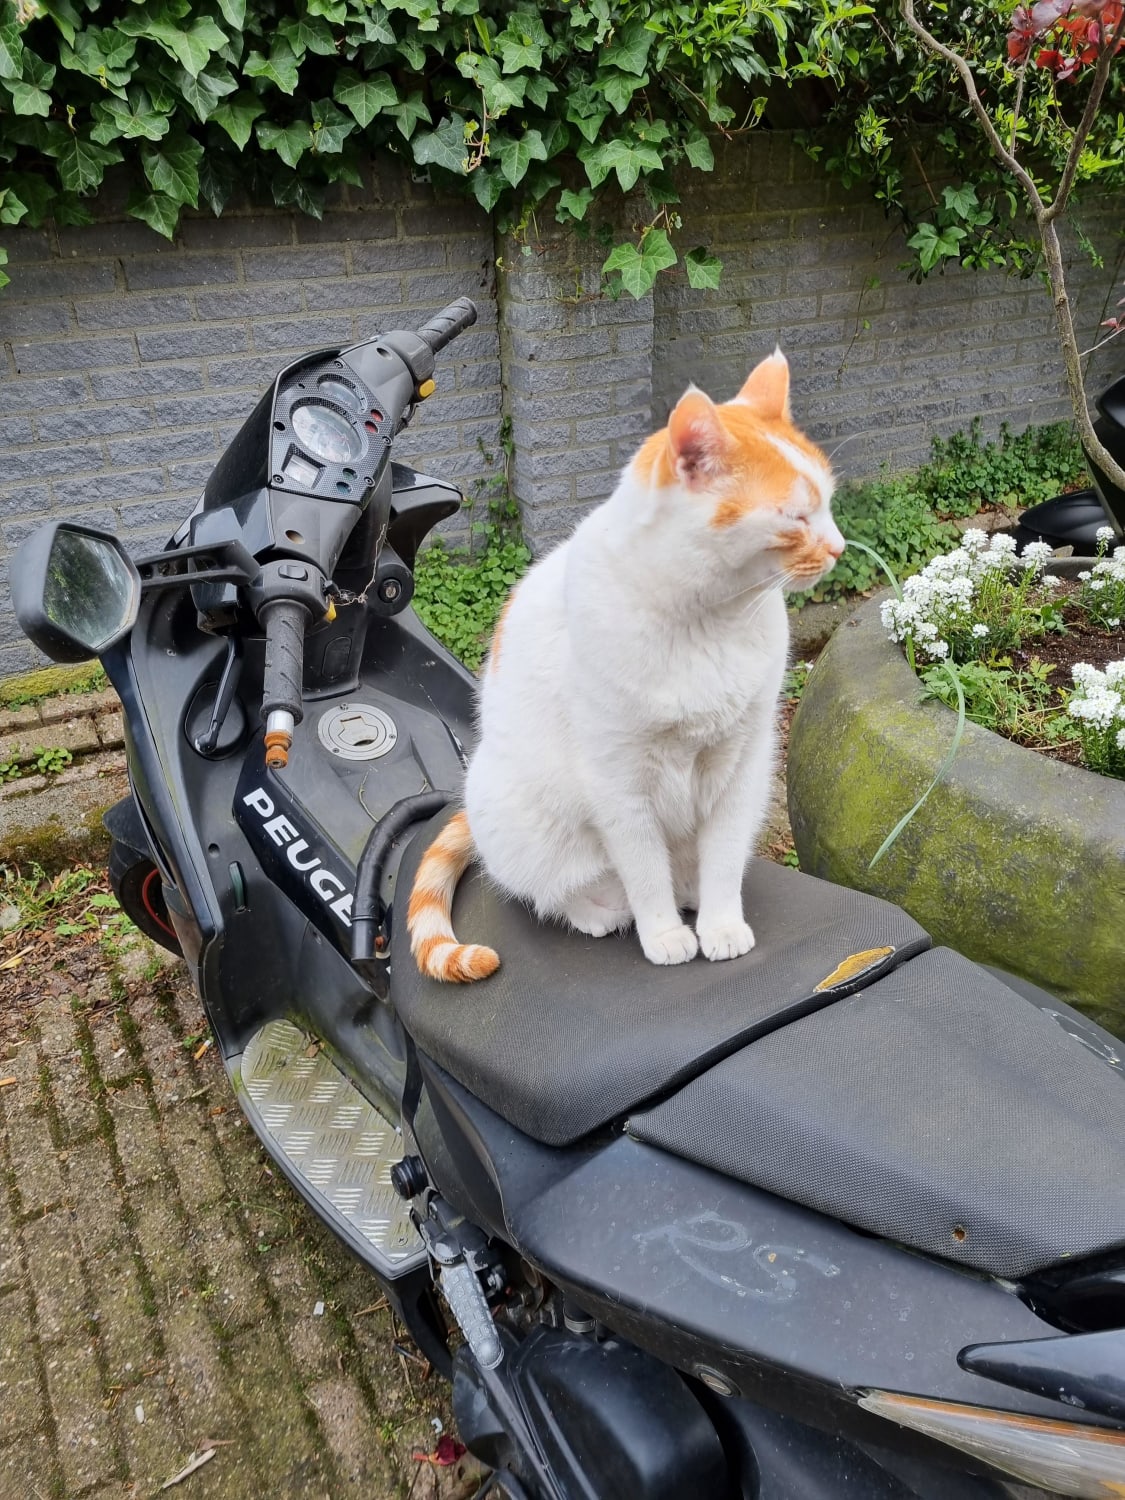 He is guarding the scooter